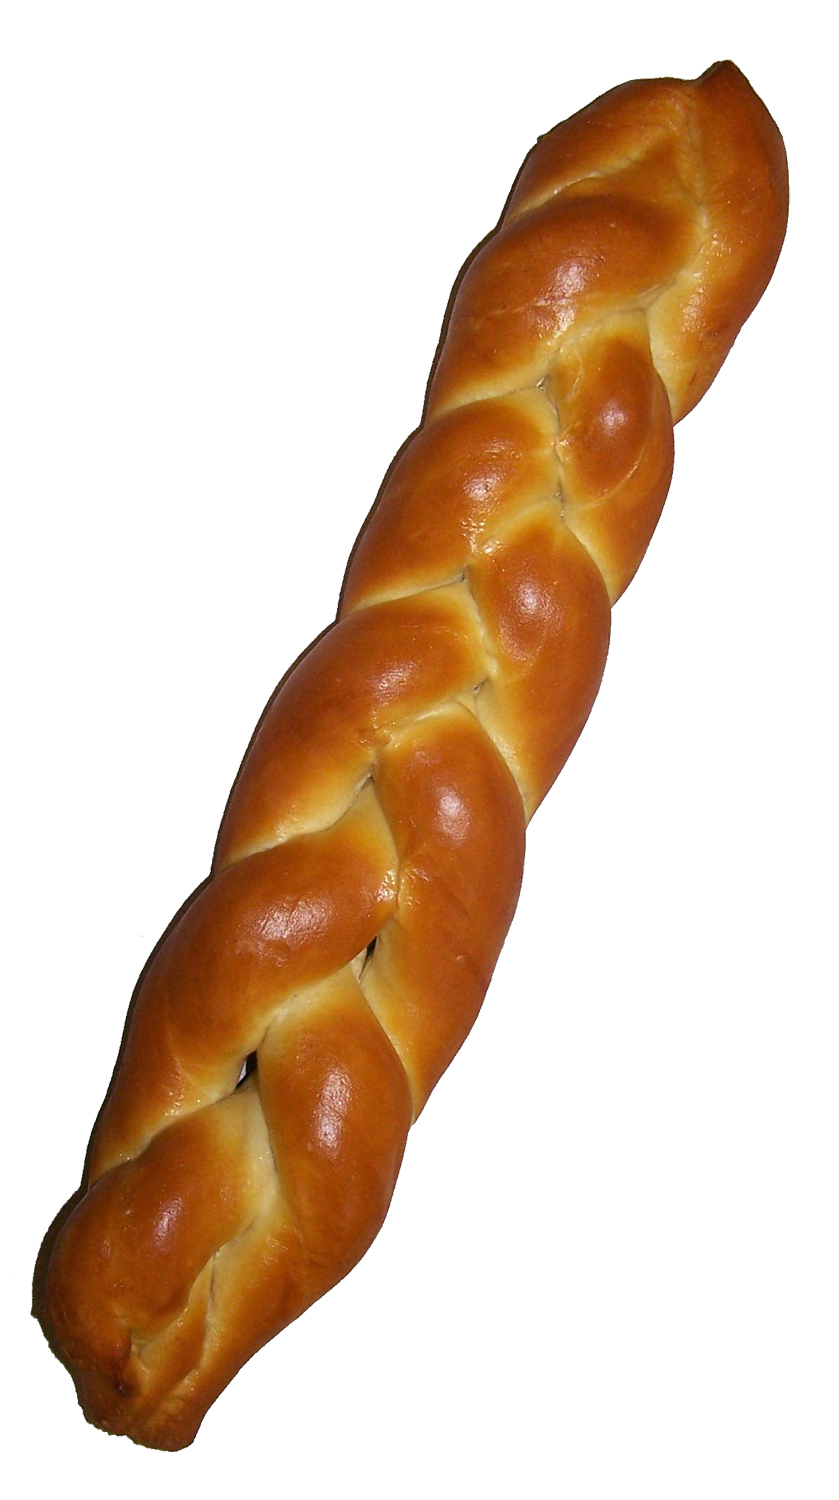 J and J Snack Braided Soft Pretzel, 7 Ounce -- 50 per case.